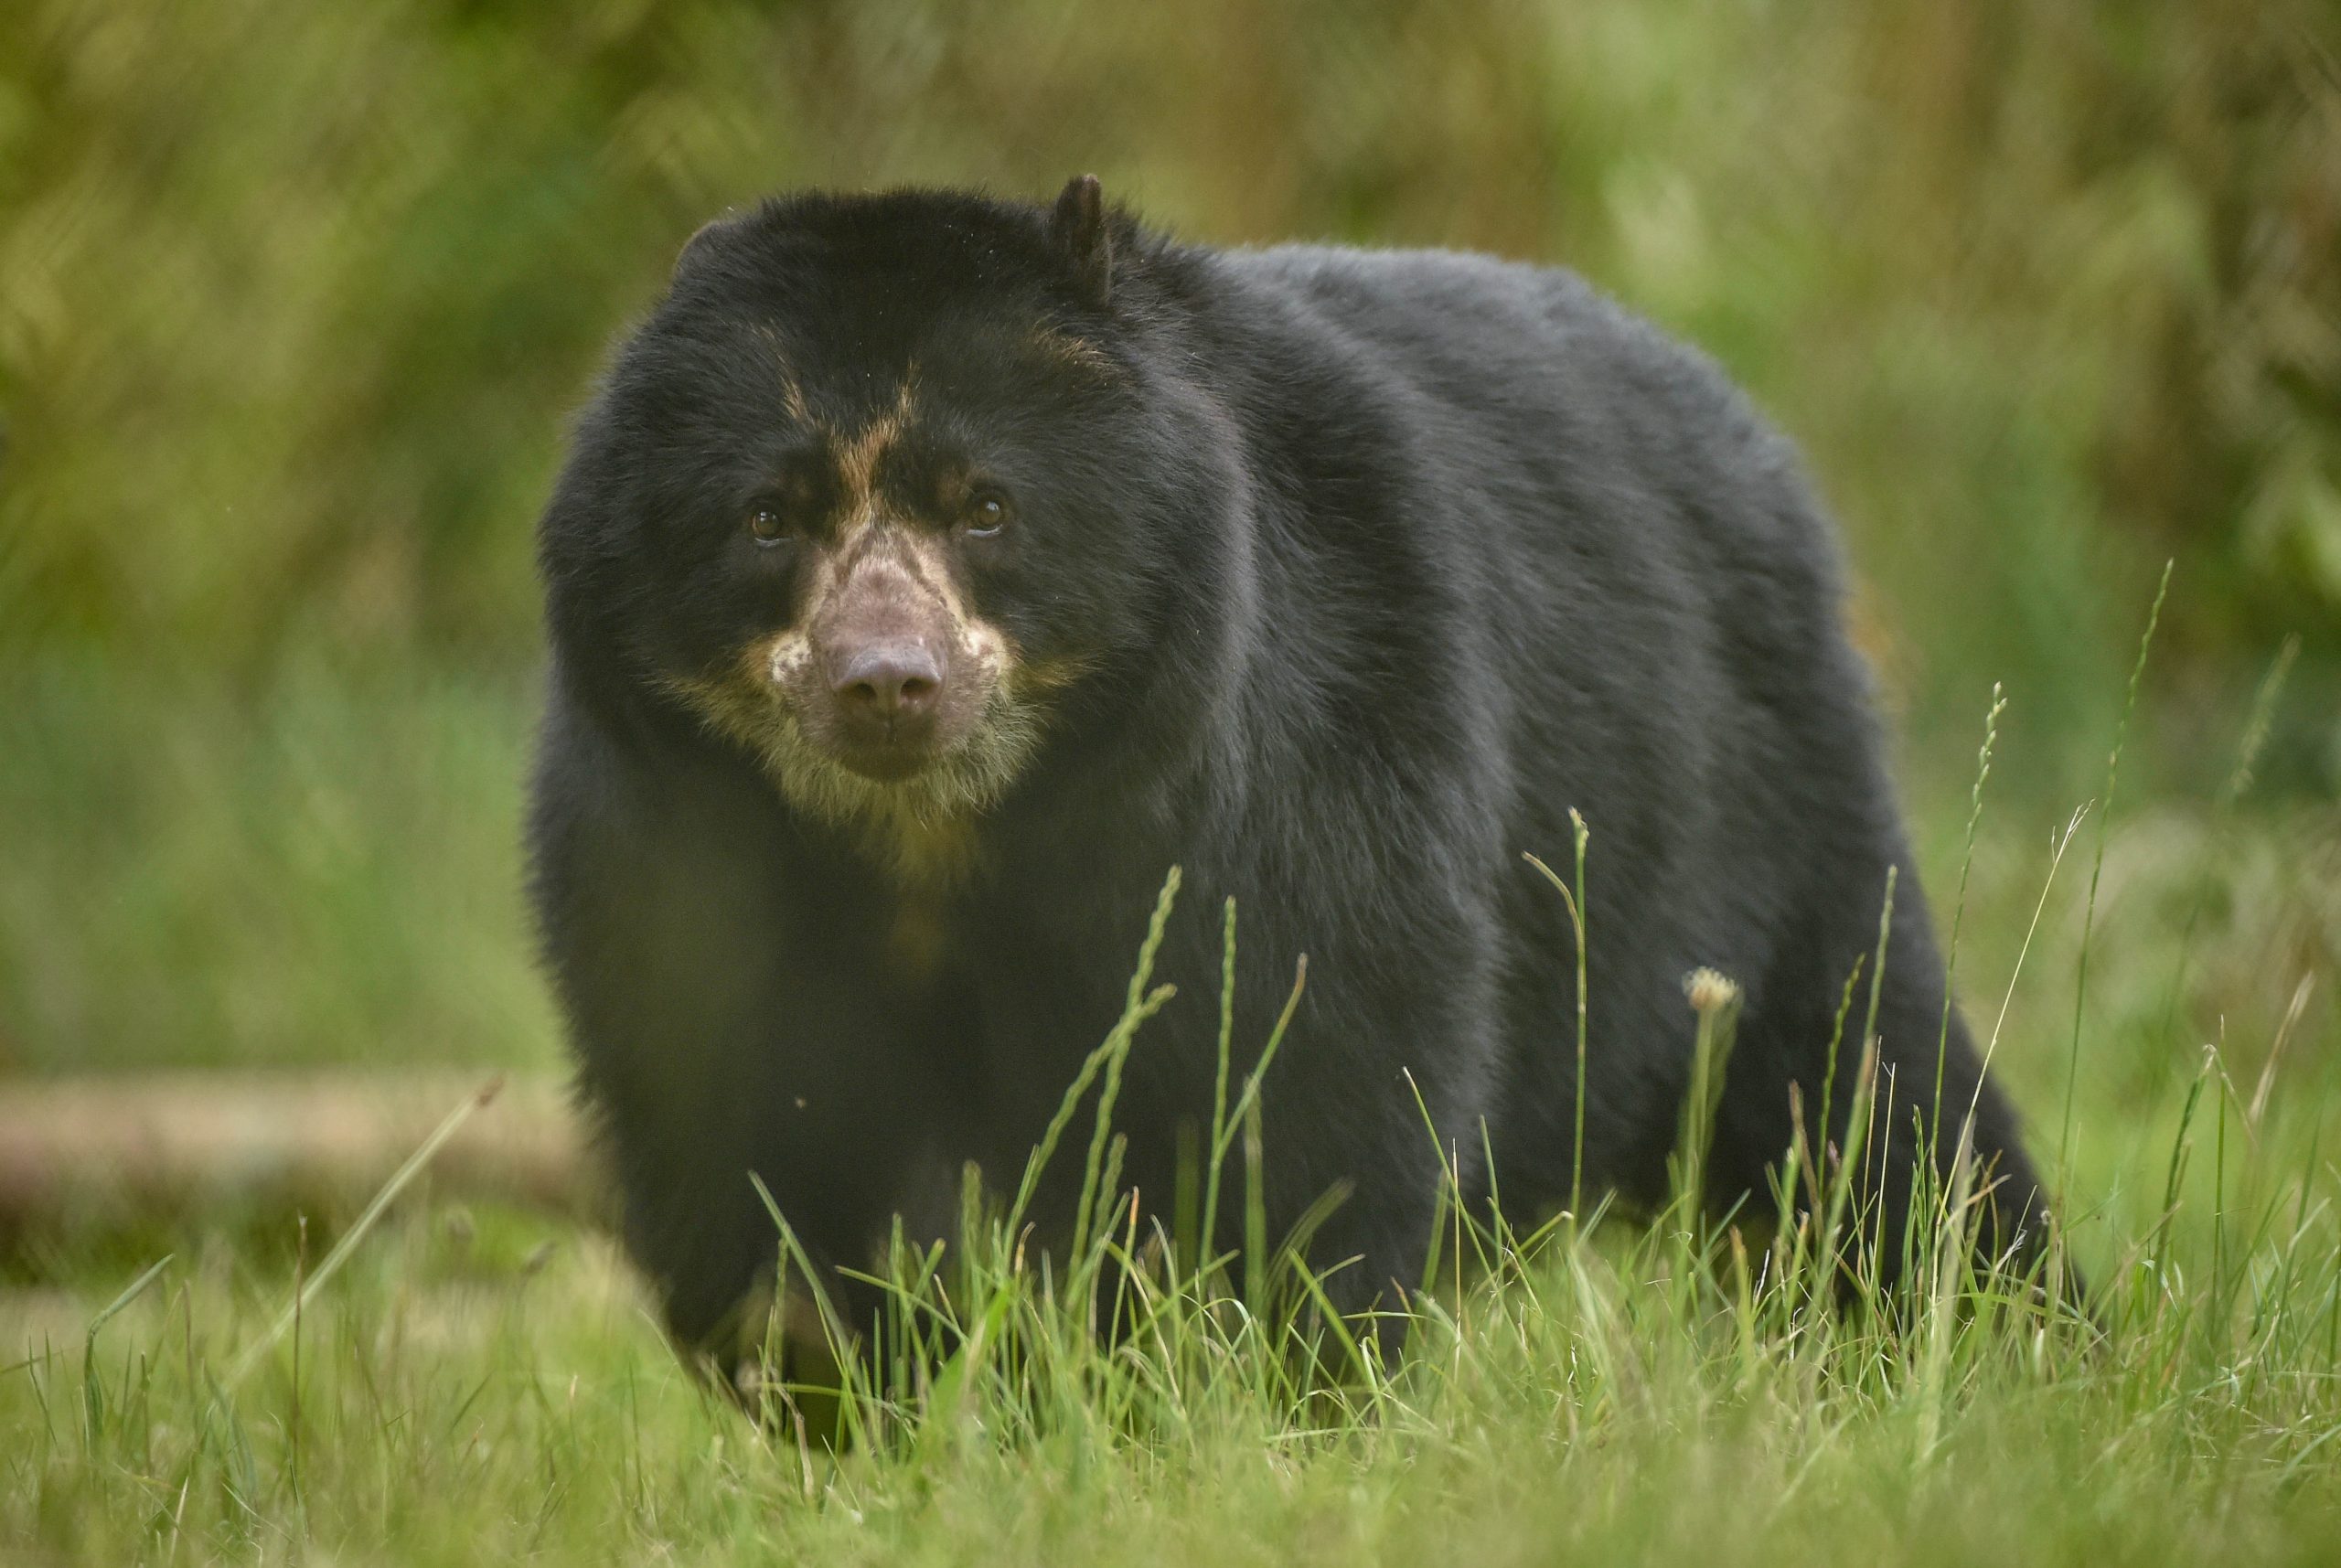 A male Andean bear is pictured among green grasses at Chester Zoo. It's round appearance is a result of the thick black coat it carries, while the species' brown "spectacles" markings are clearly visible on the face